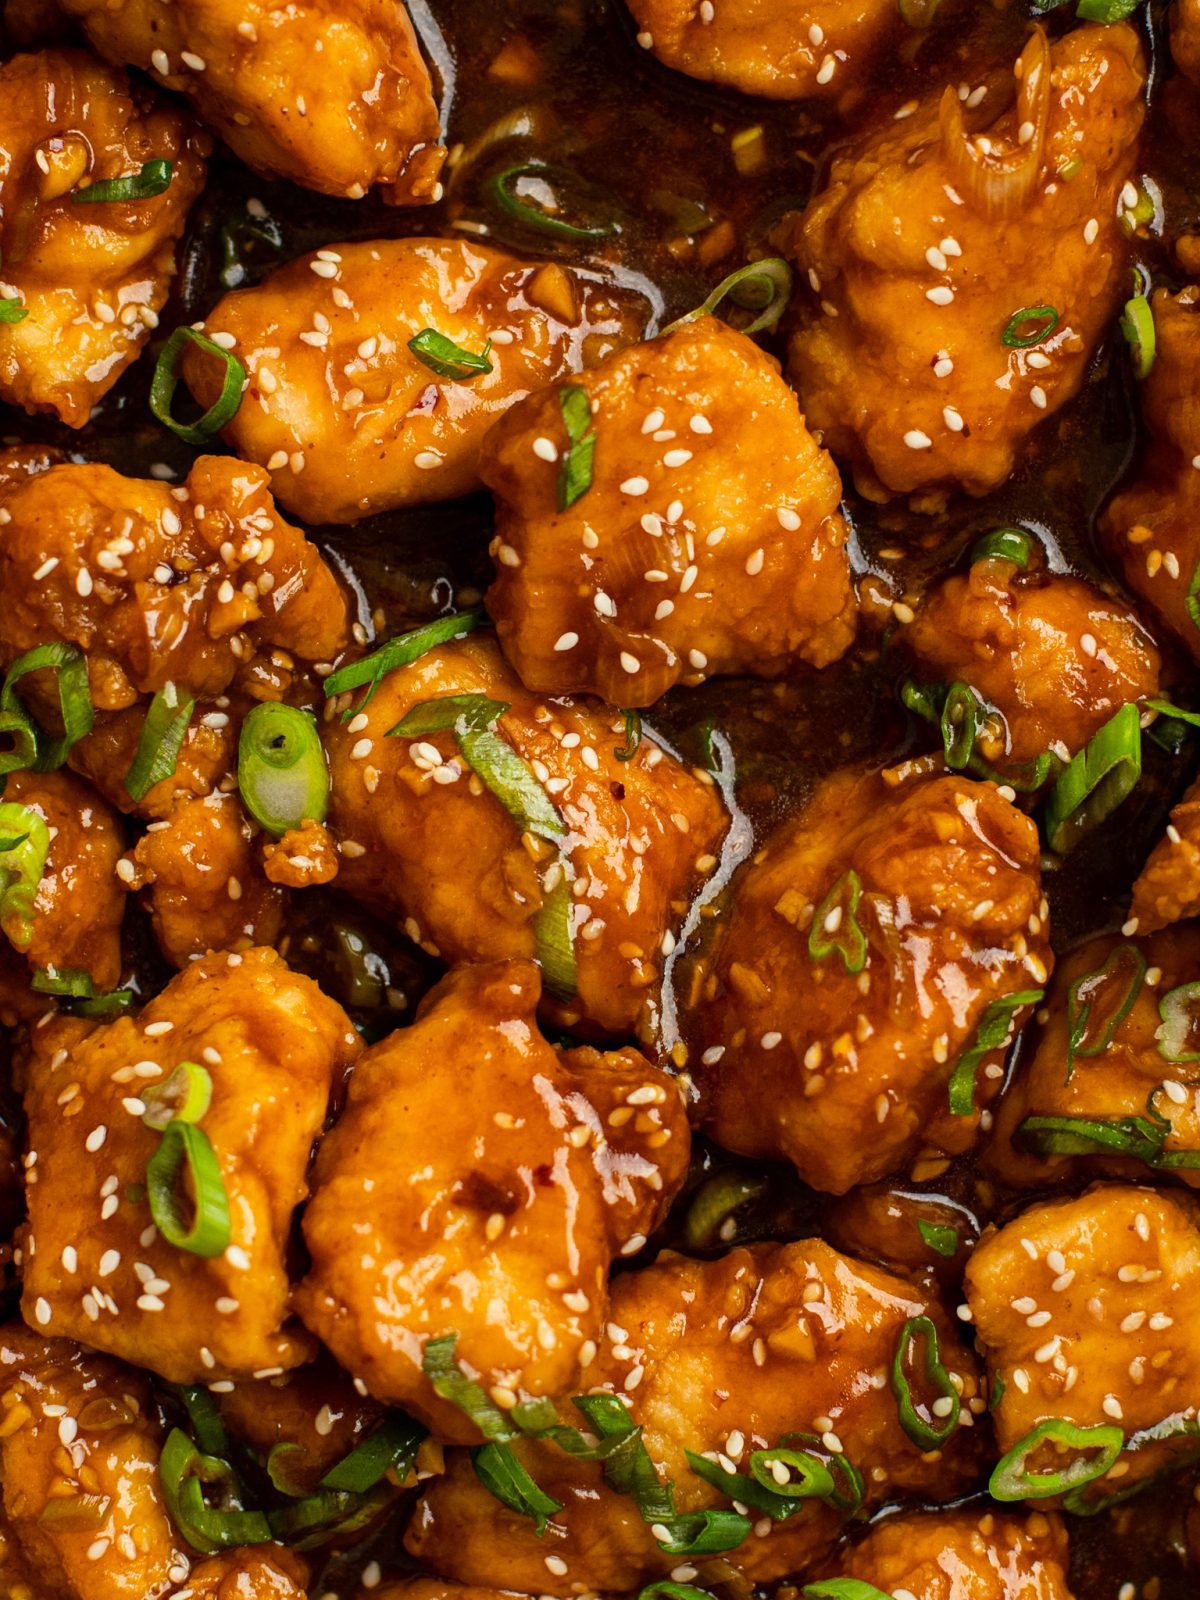 General Tso's Chicken - Once Upon a Chef